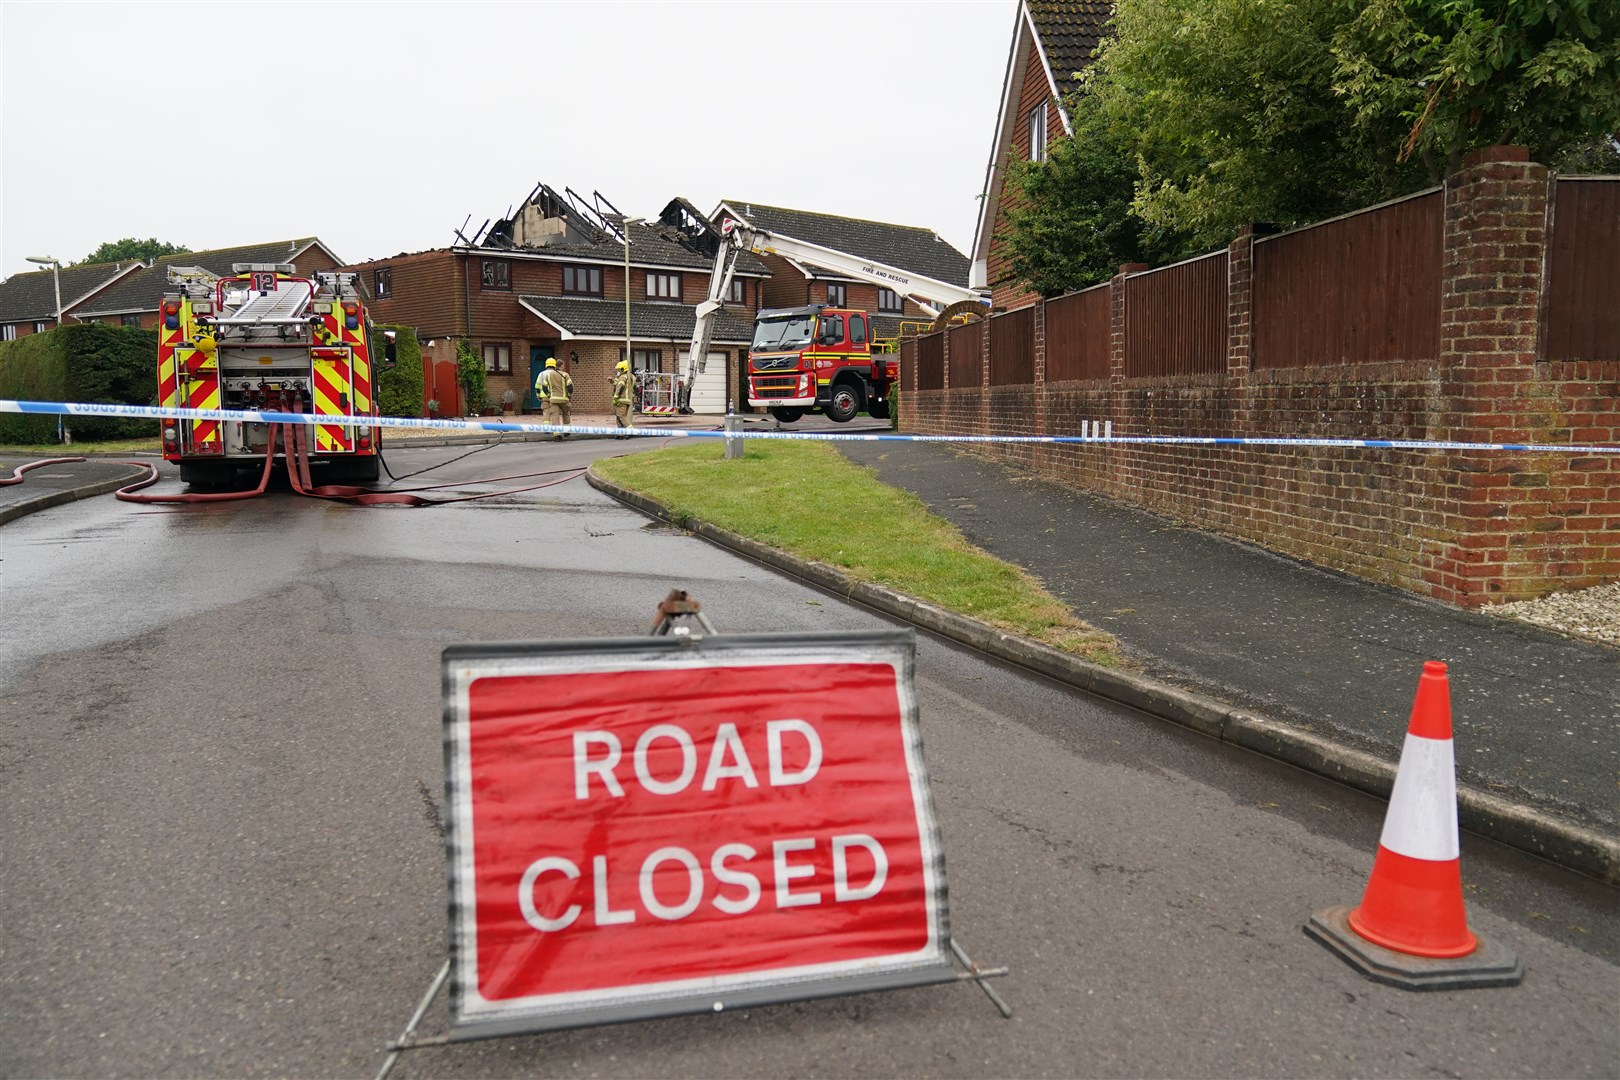 Firefighters remain at the scene of the incident (Andrew Matthews/PA)